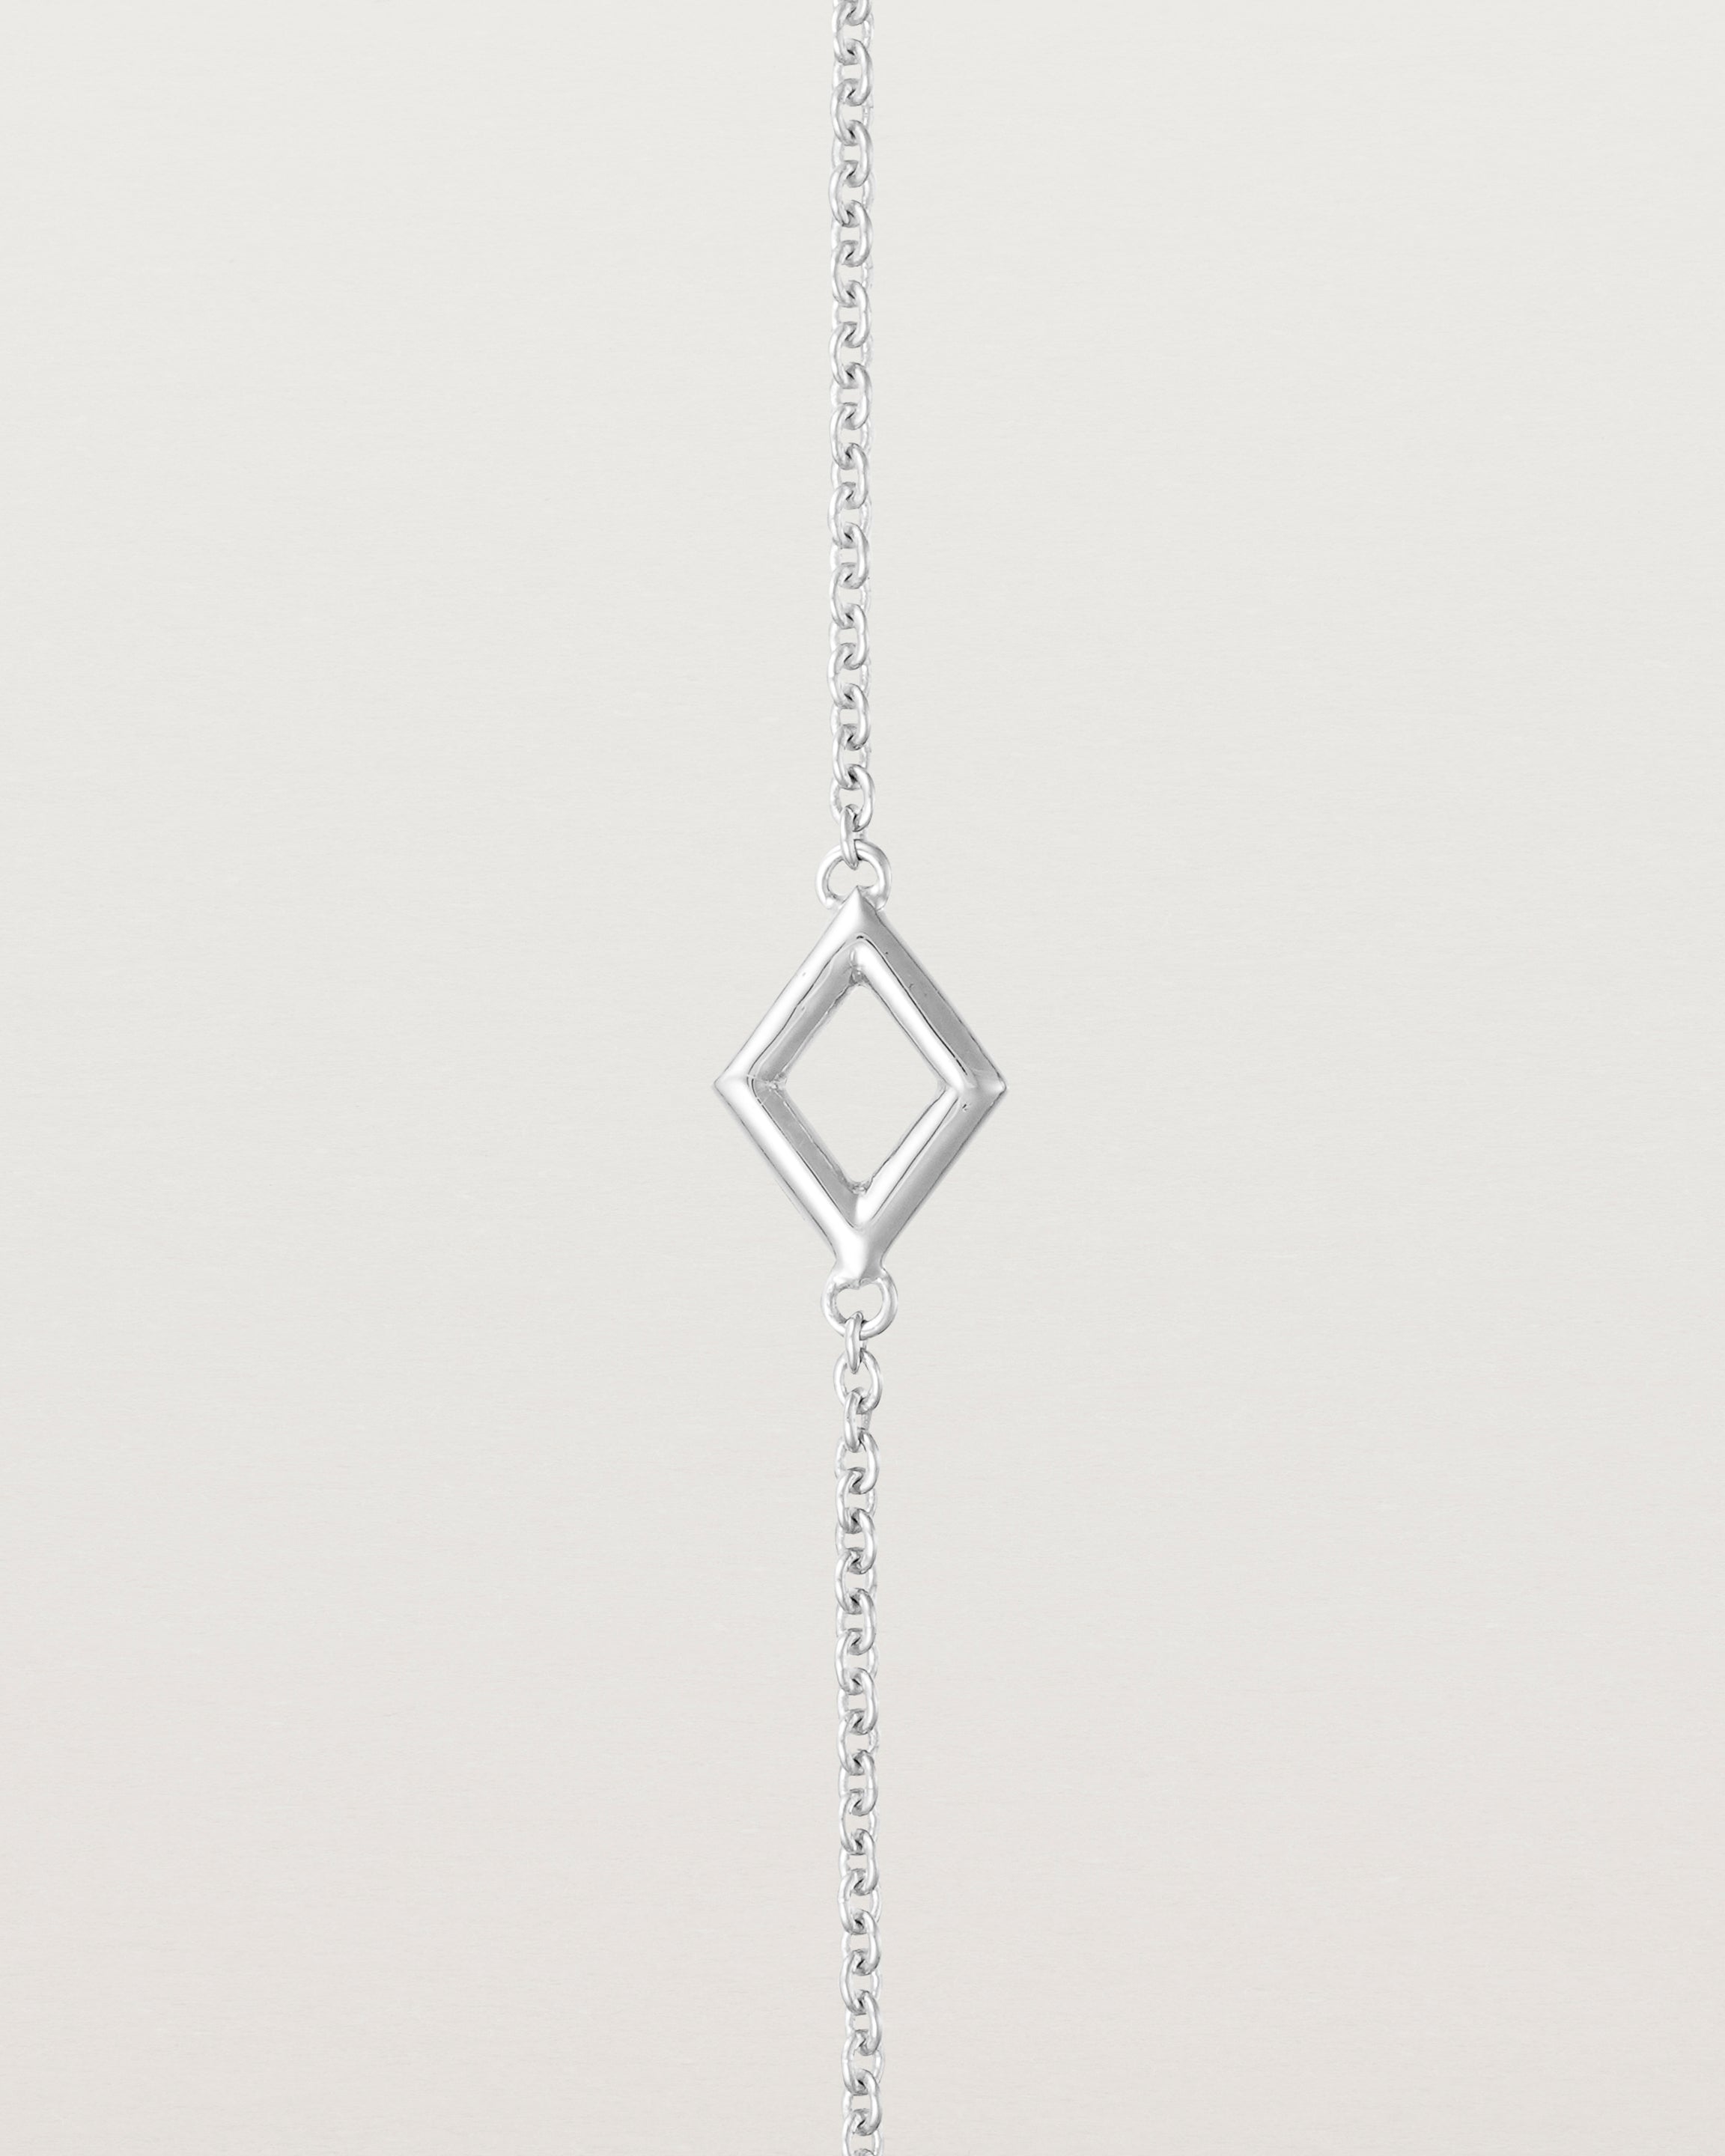 Close up view of the Nuna Bracelet in sterling silver.